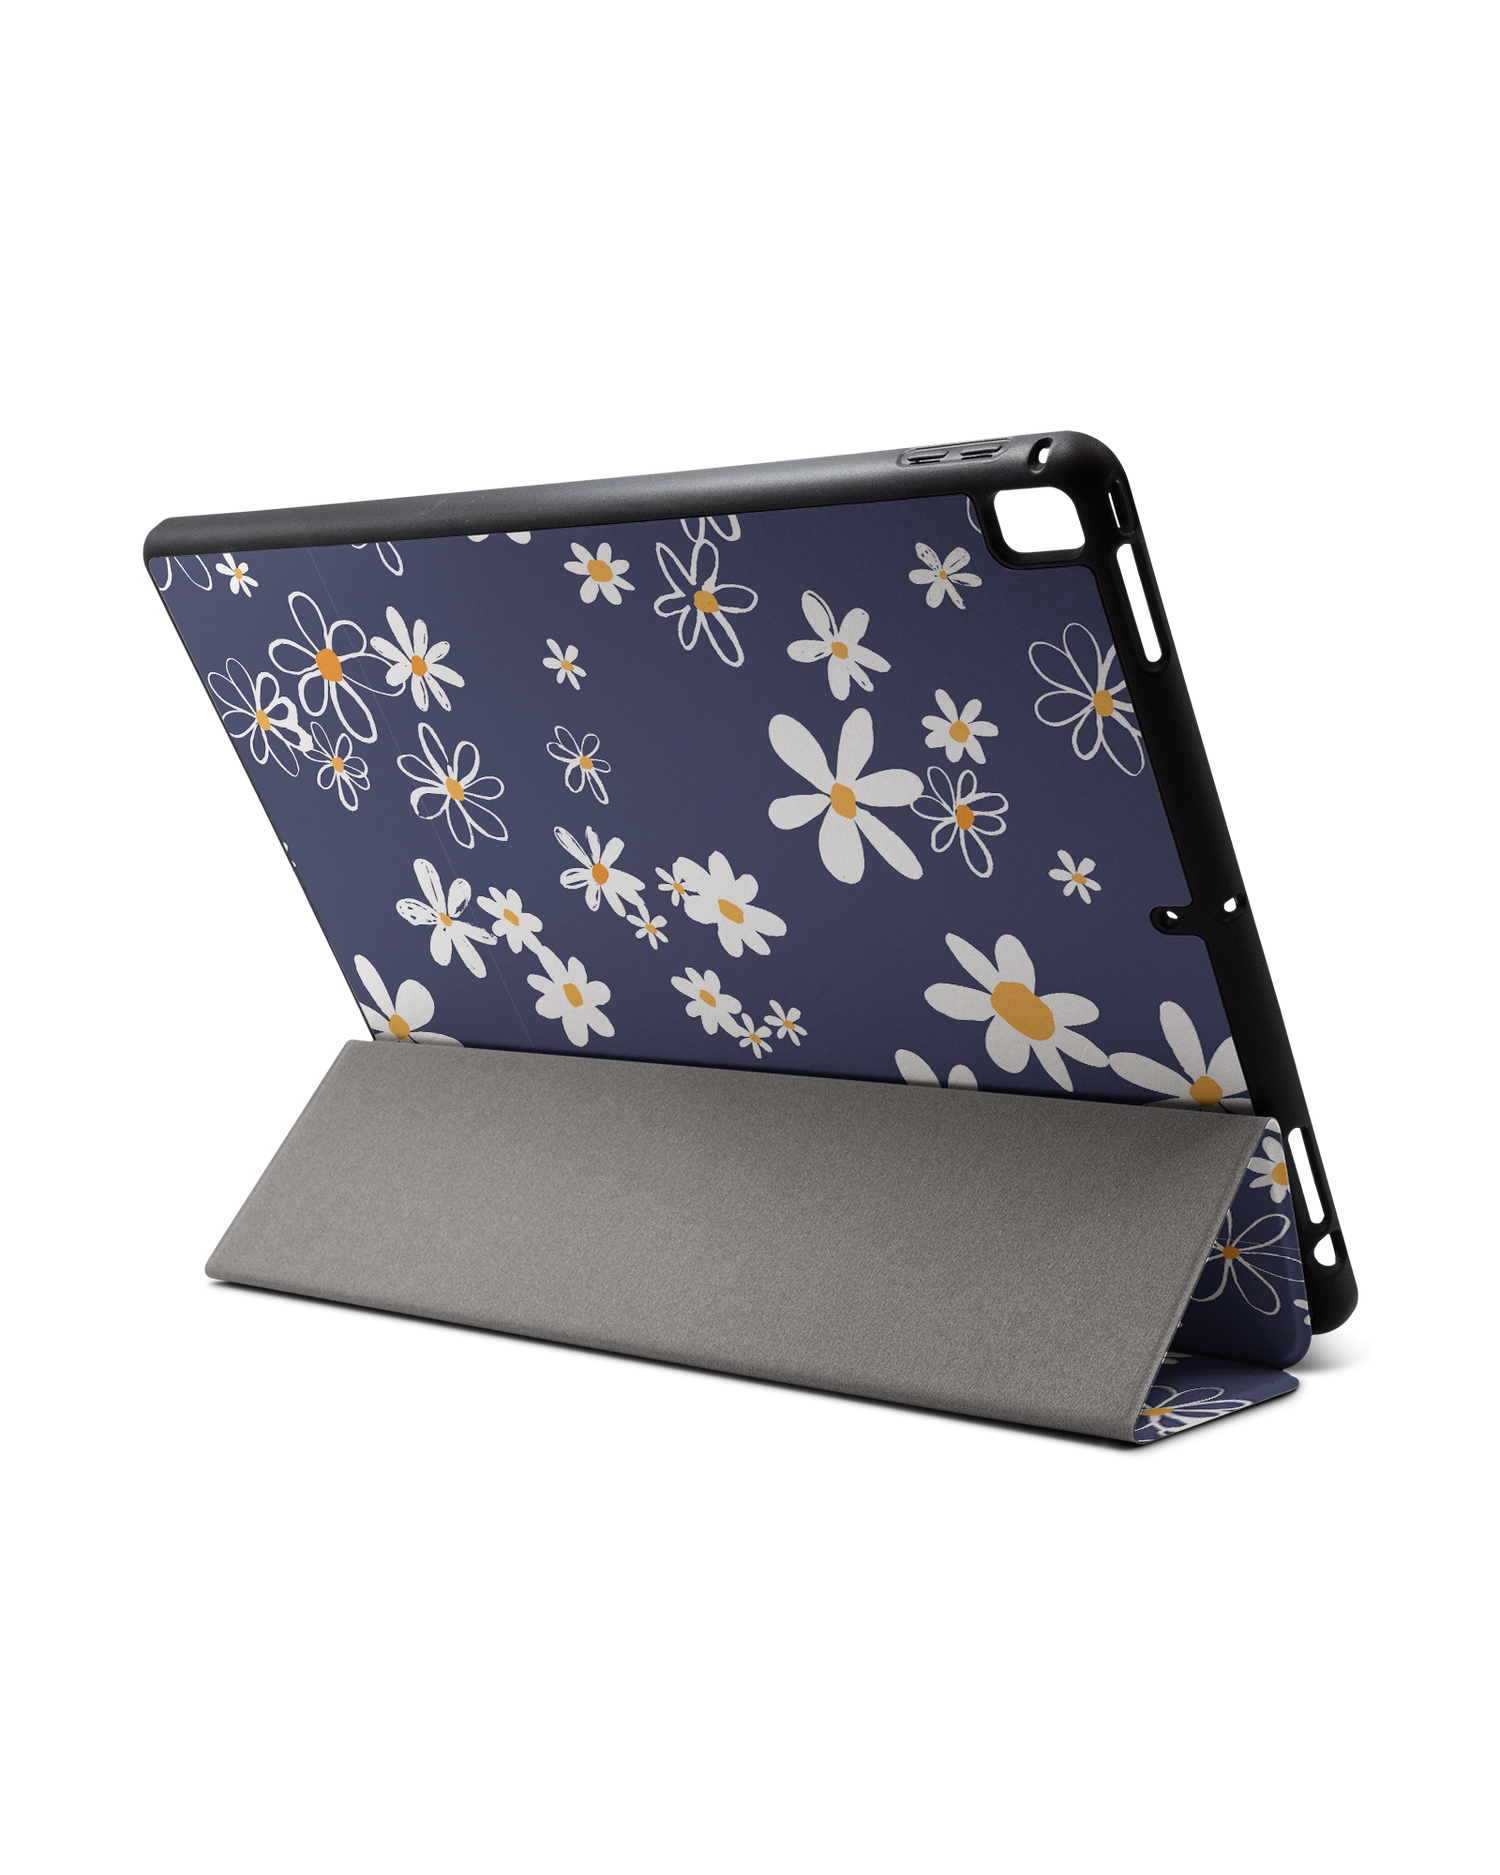 Navy Daisies iPad Case with Pencil Holder for Apple iPad Pro 2 12.9